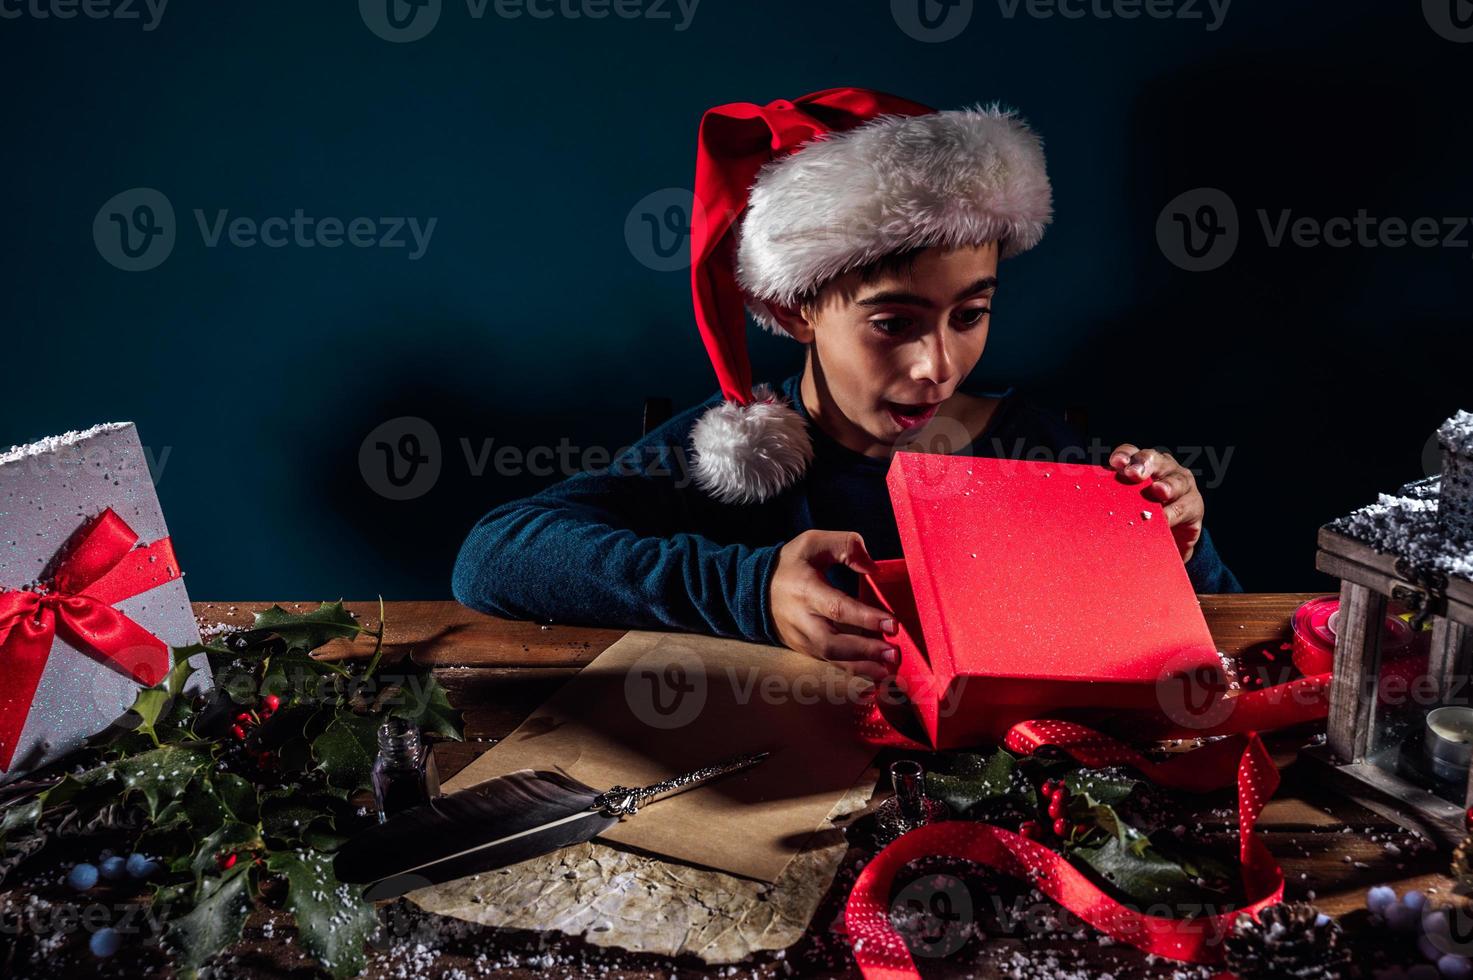 Child with Christmas hat writes a letter to santa claus for gifts photo